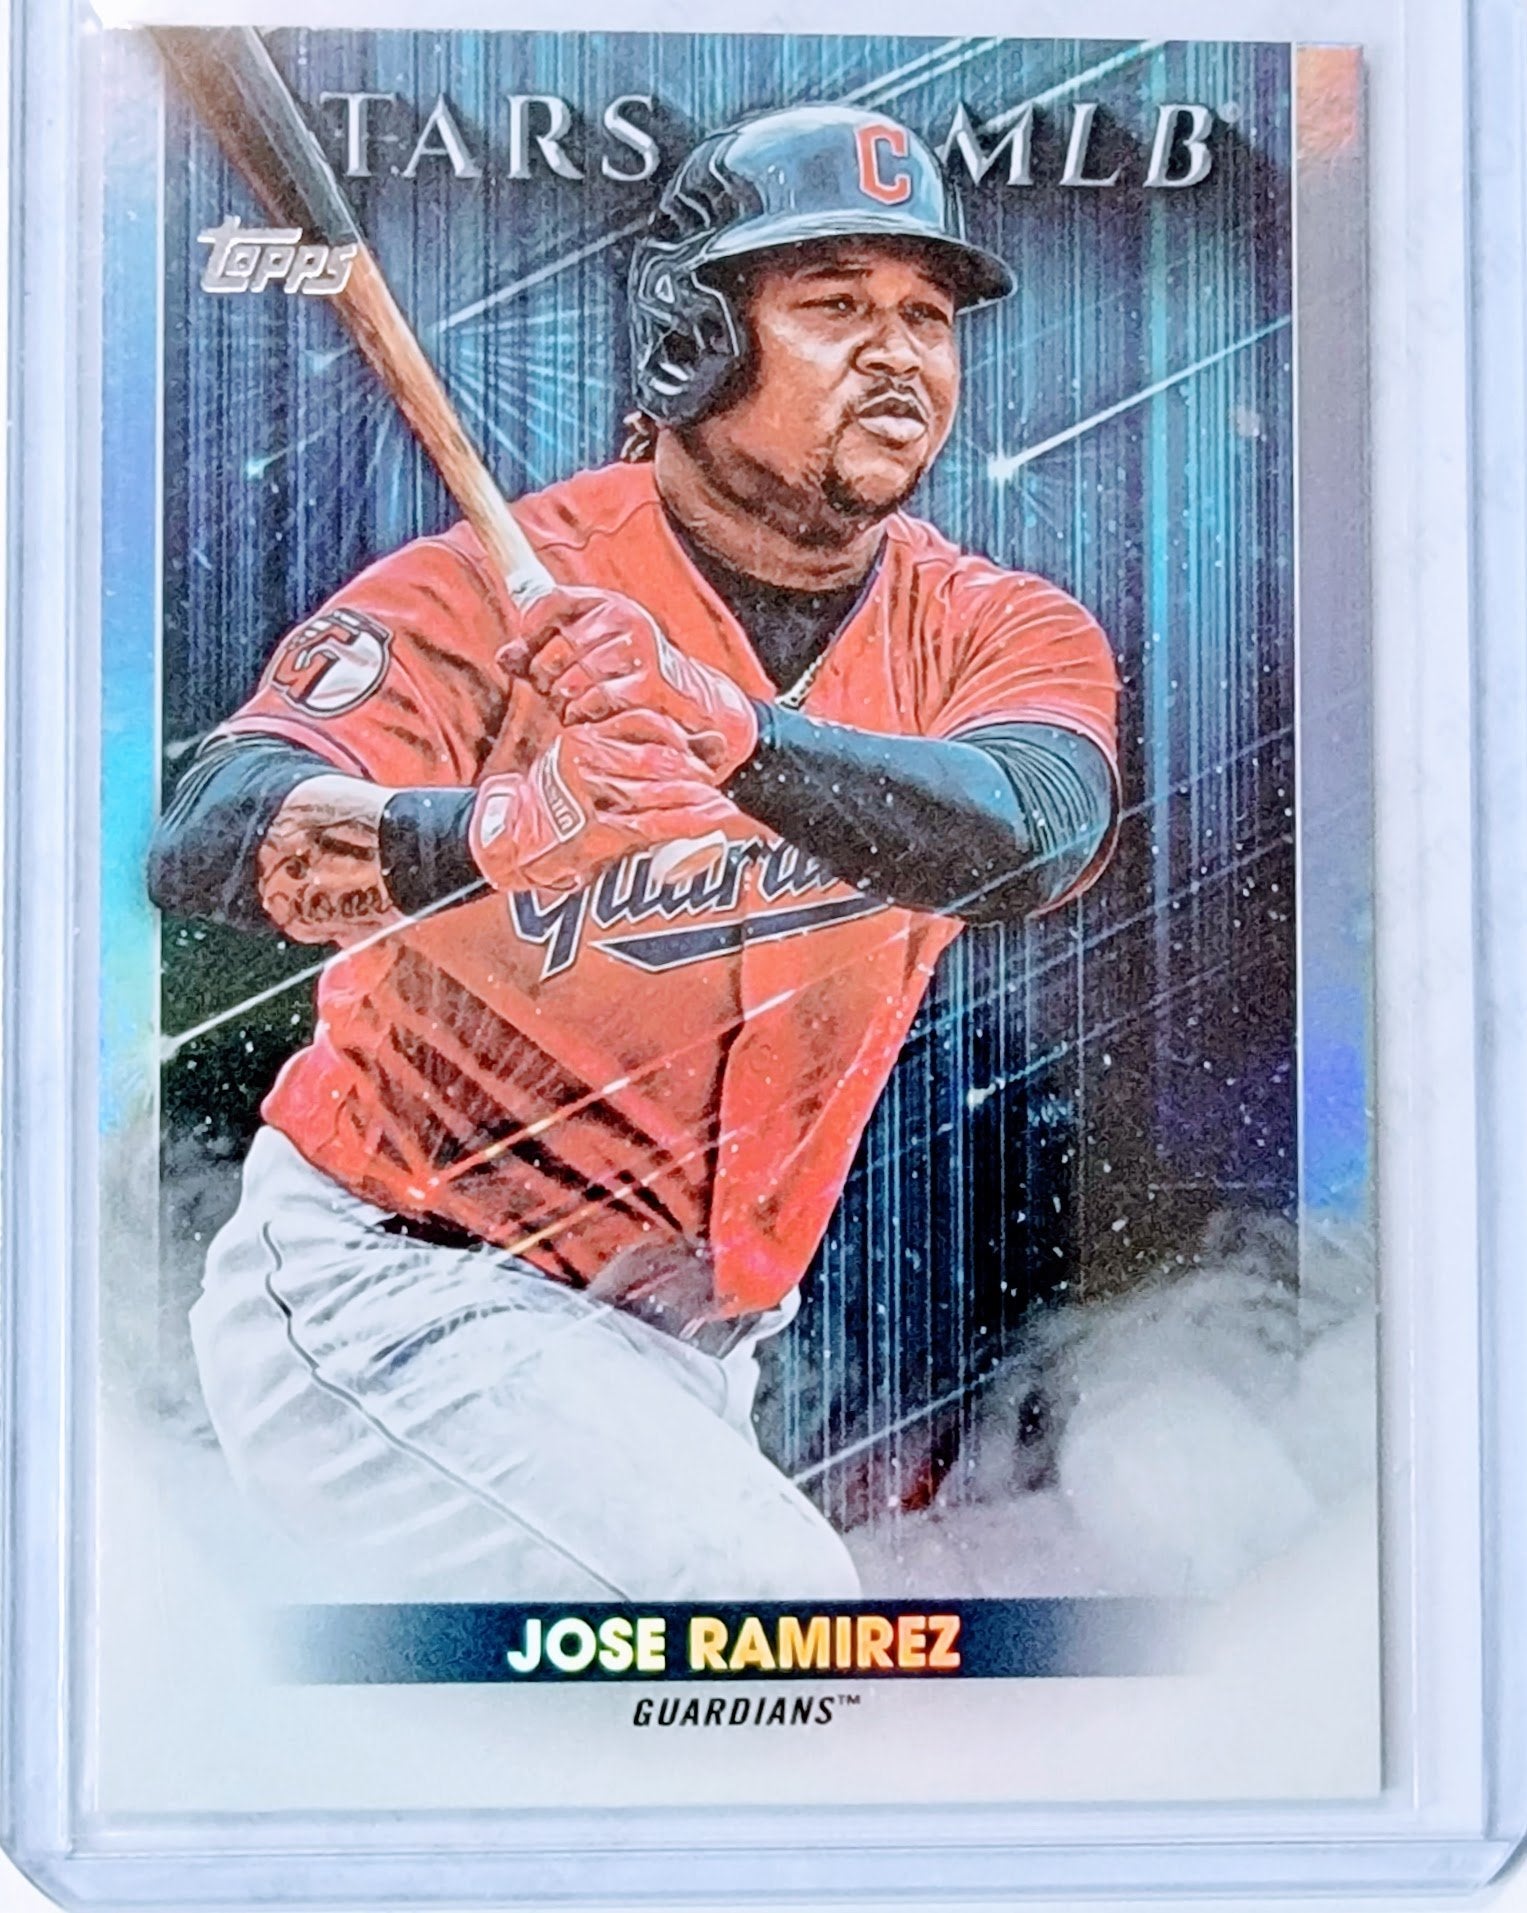 2022 Topps Jose Ramirez Stars of the MLB Baseball Trading Card GRB1 simple Xclusive Collectibles   